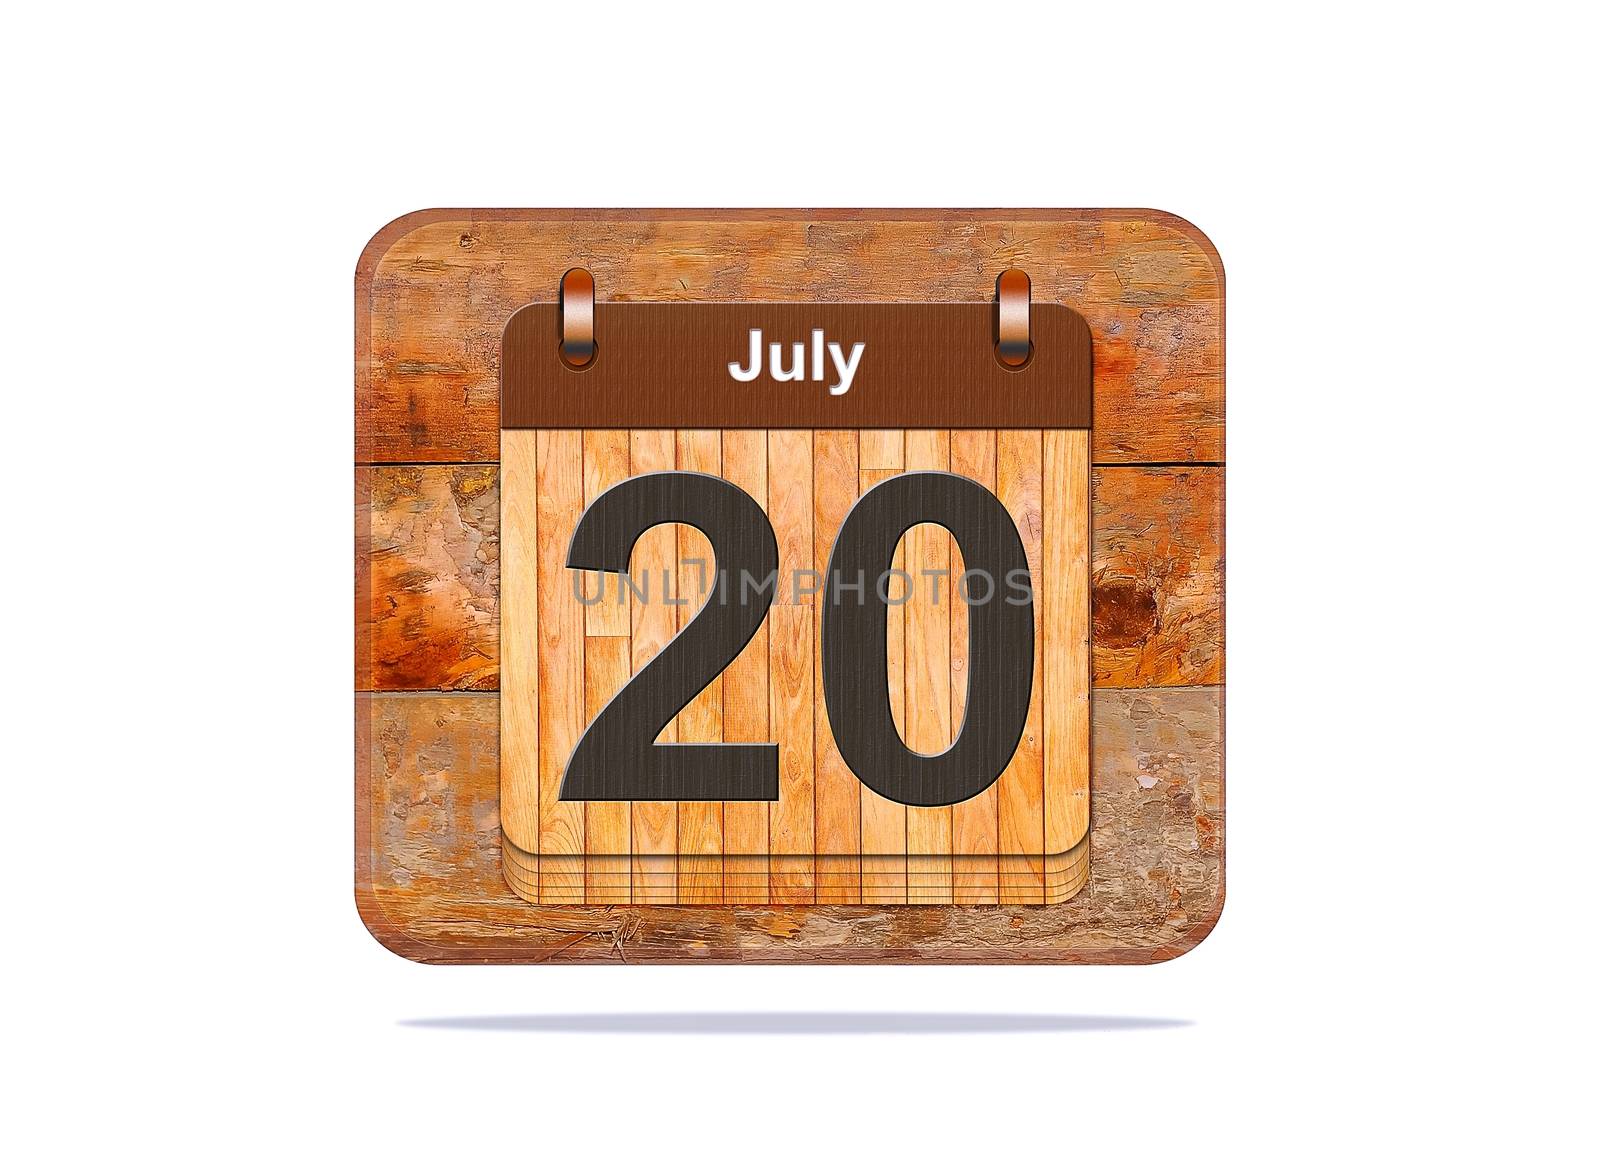 Calendar with the date of July 20.